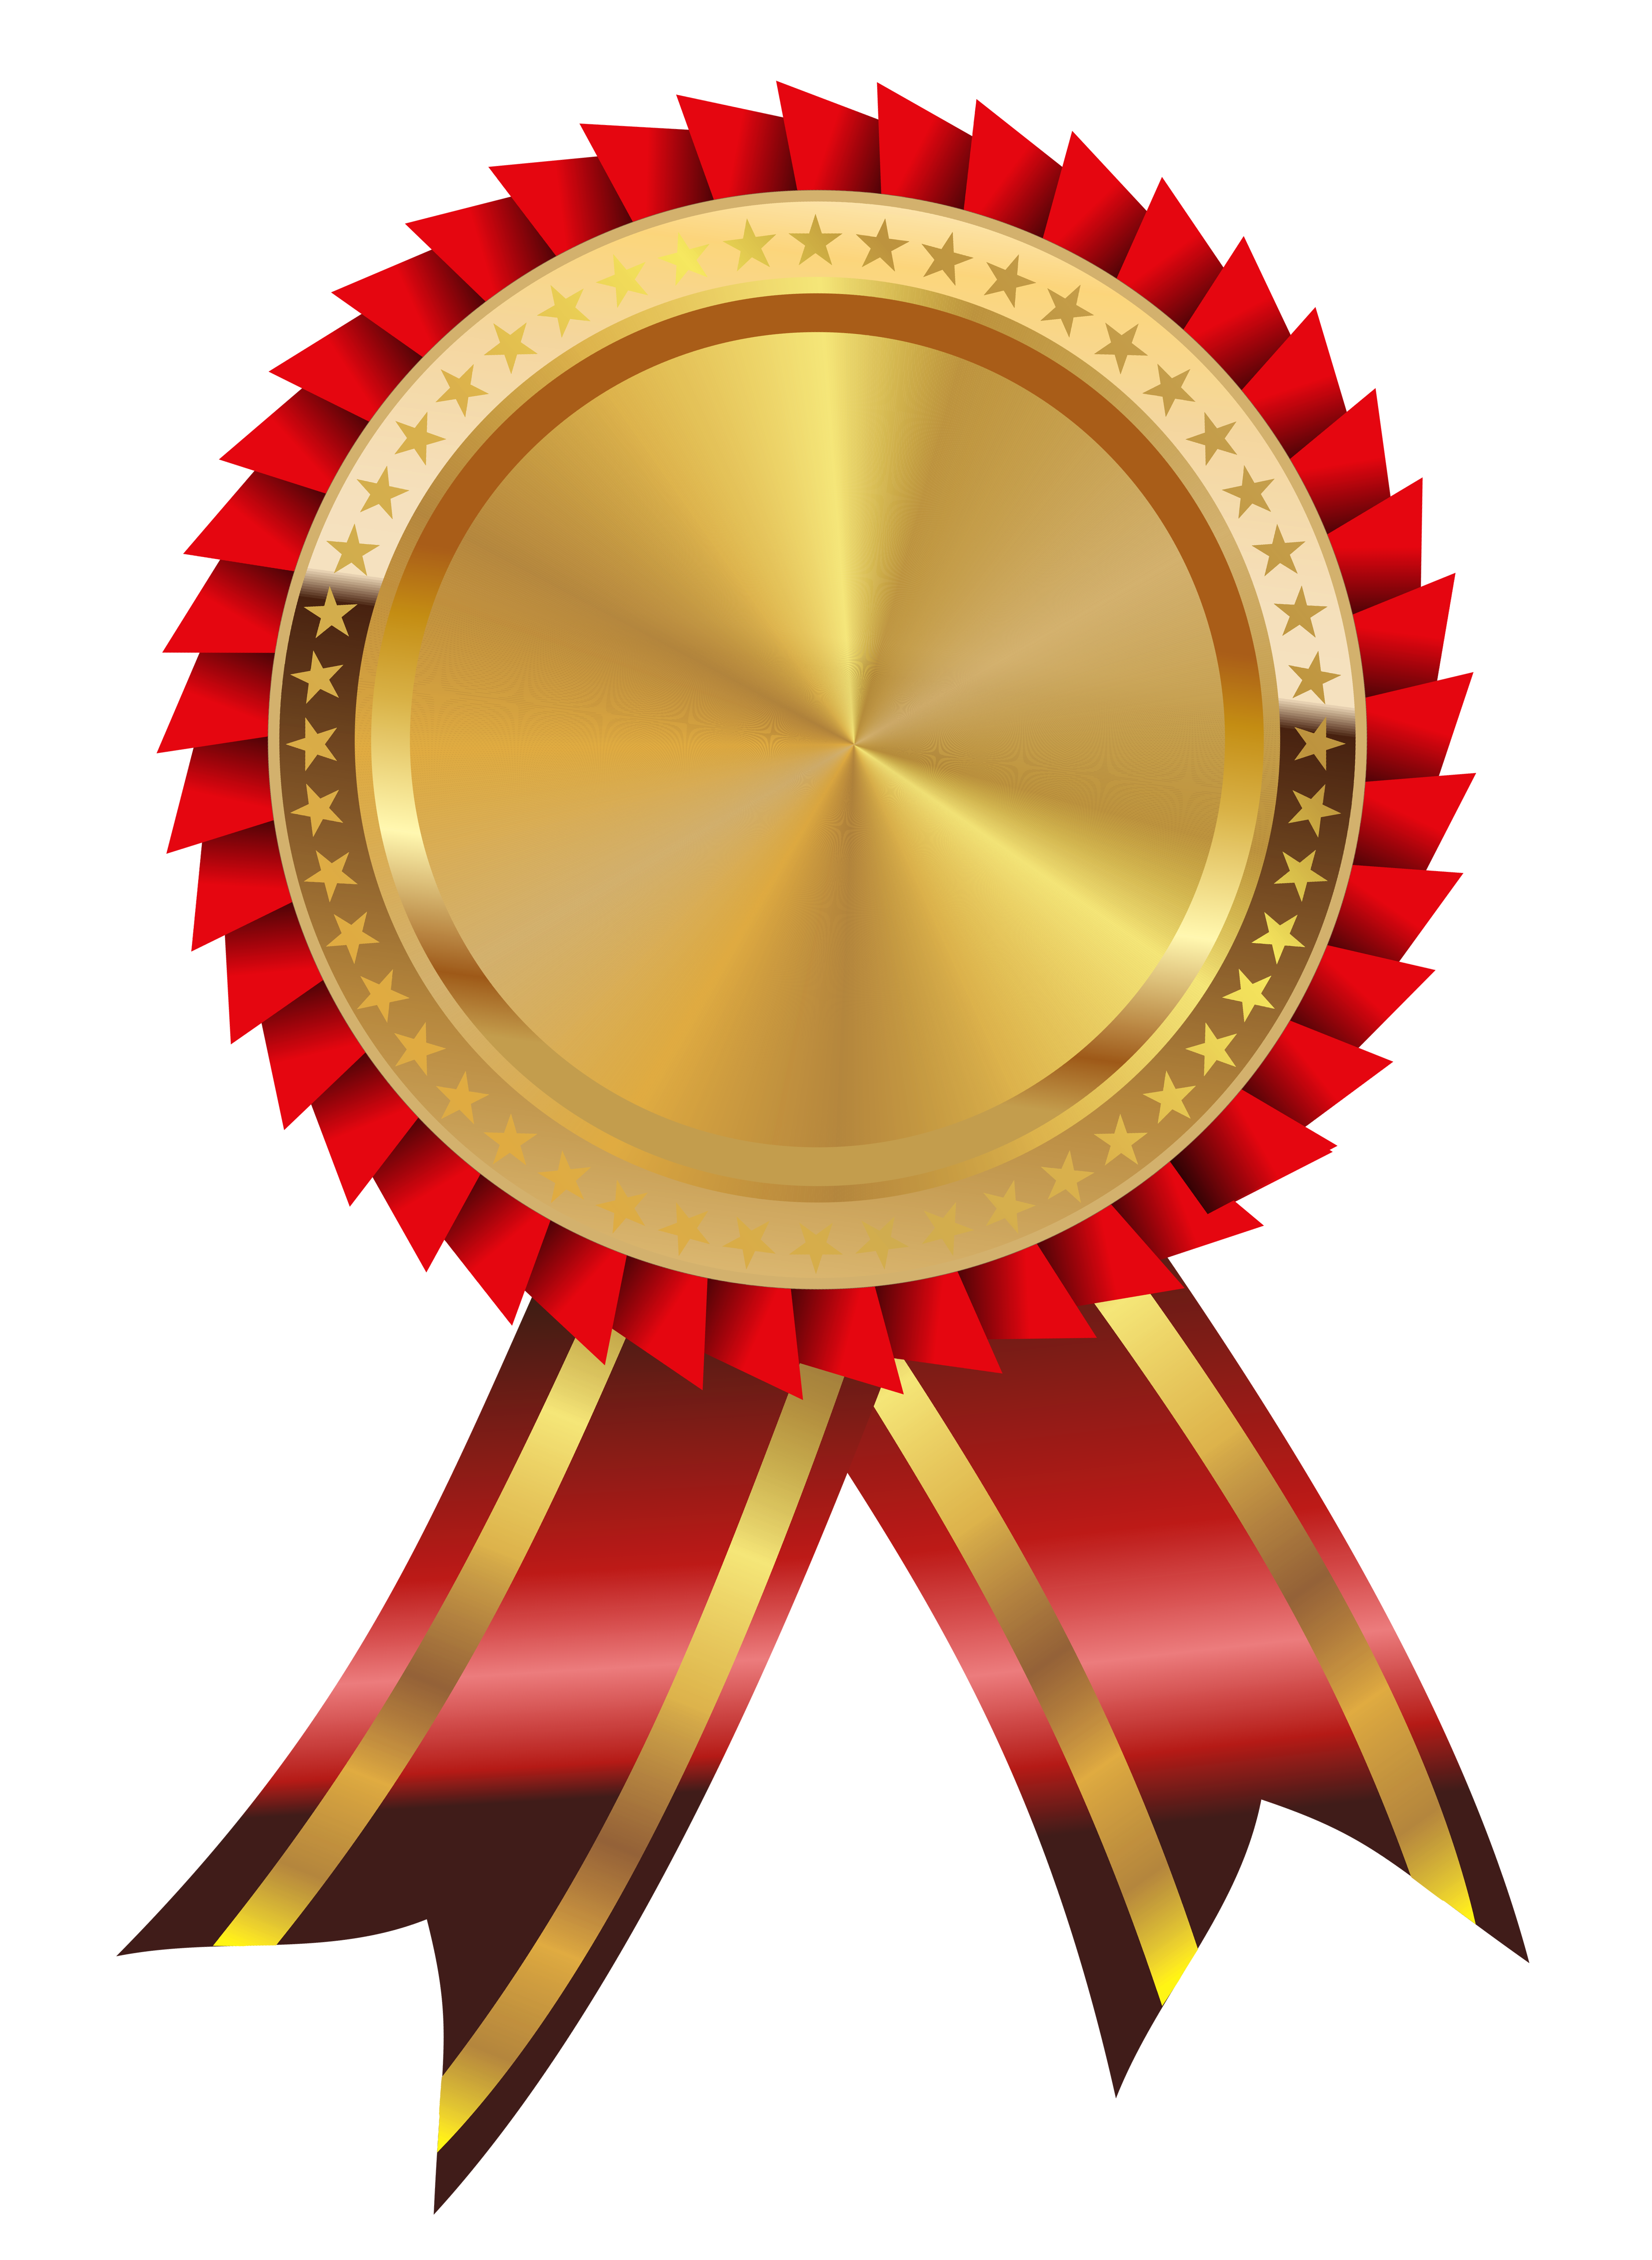 Gold and Red Medal PNG Clipart Image